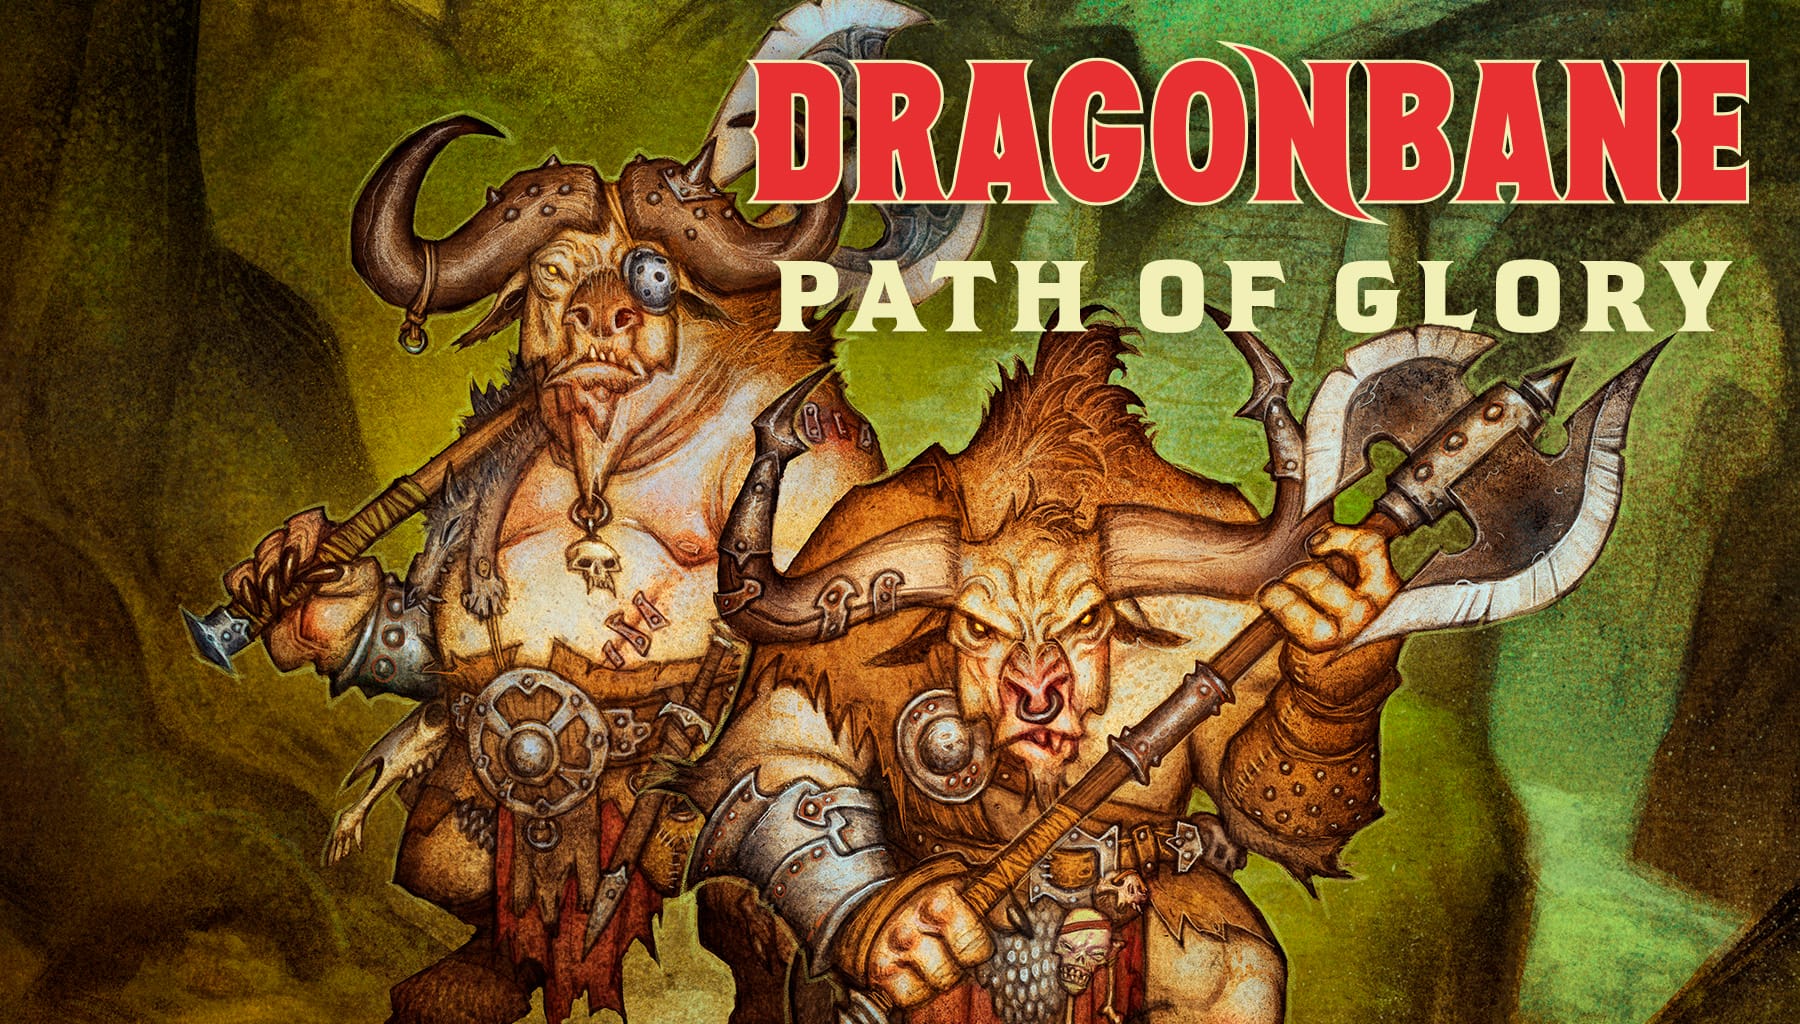 Path of Glory Announced for the Dragonbane RPG